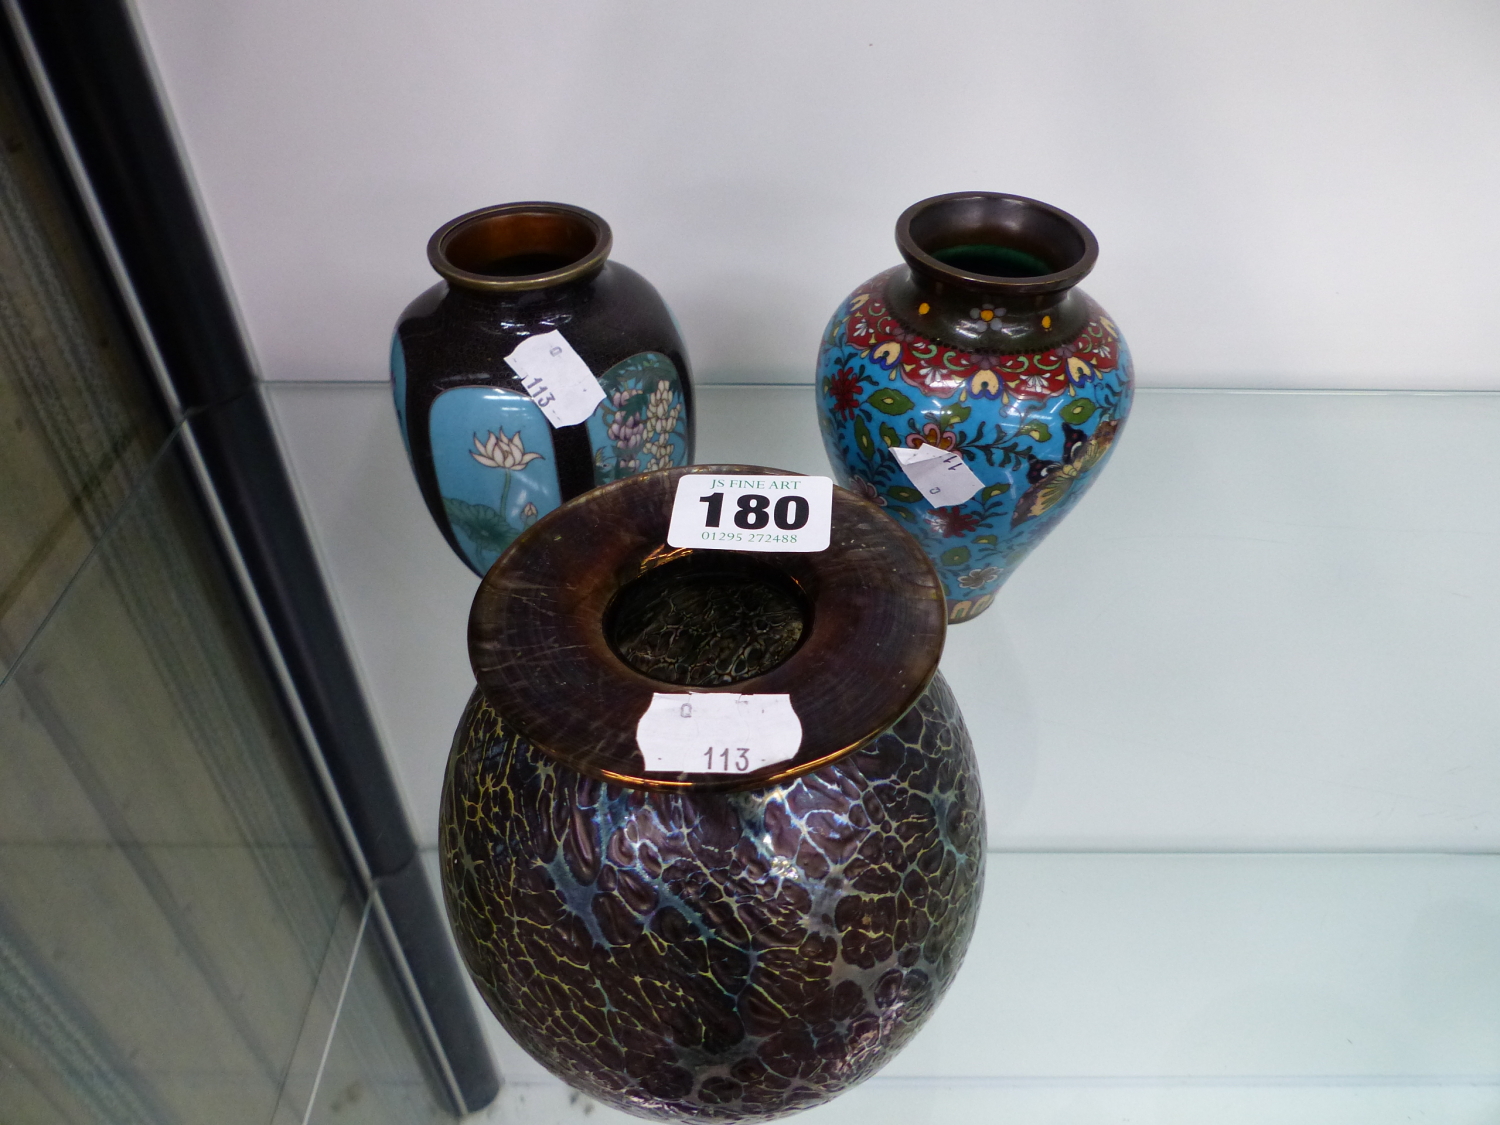 TWO CLOISONNE VASES AND A LUSTRE GLASS VASE